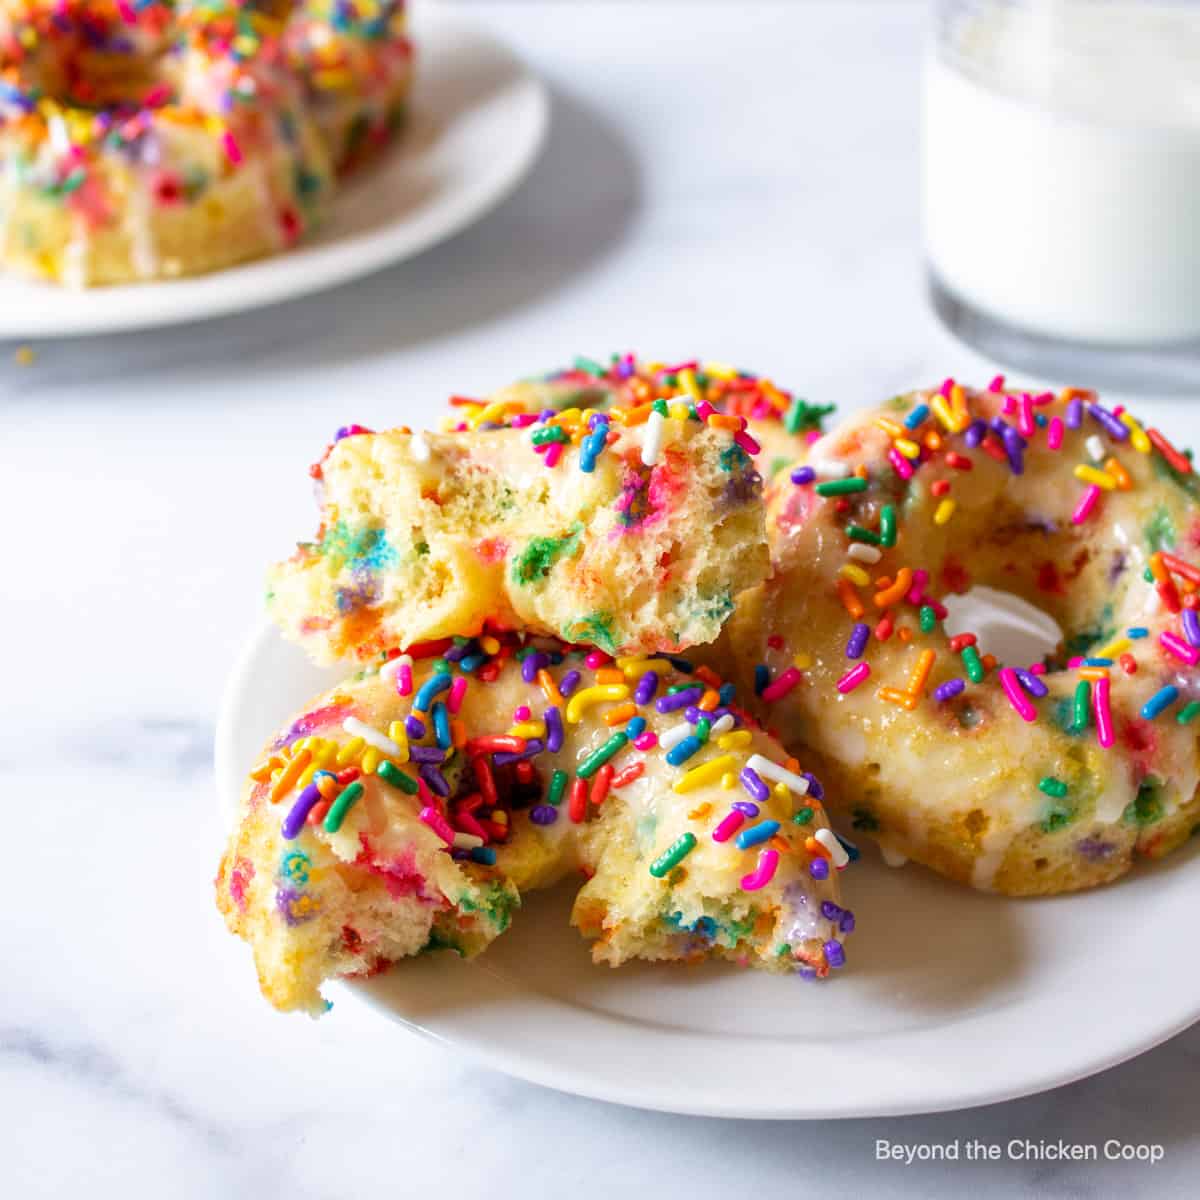 Baked donuts covered with colorful sprinkles.